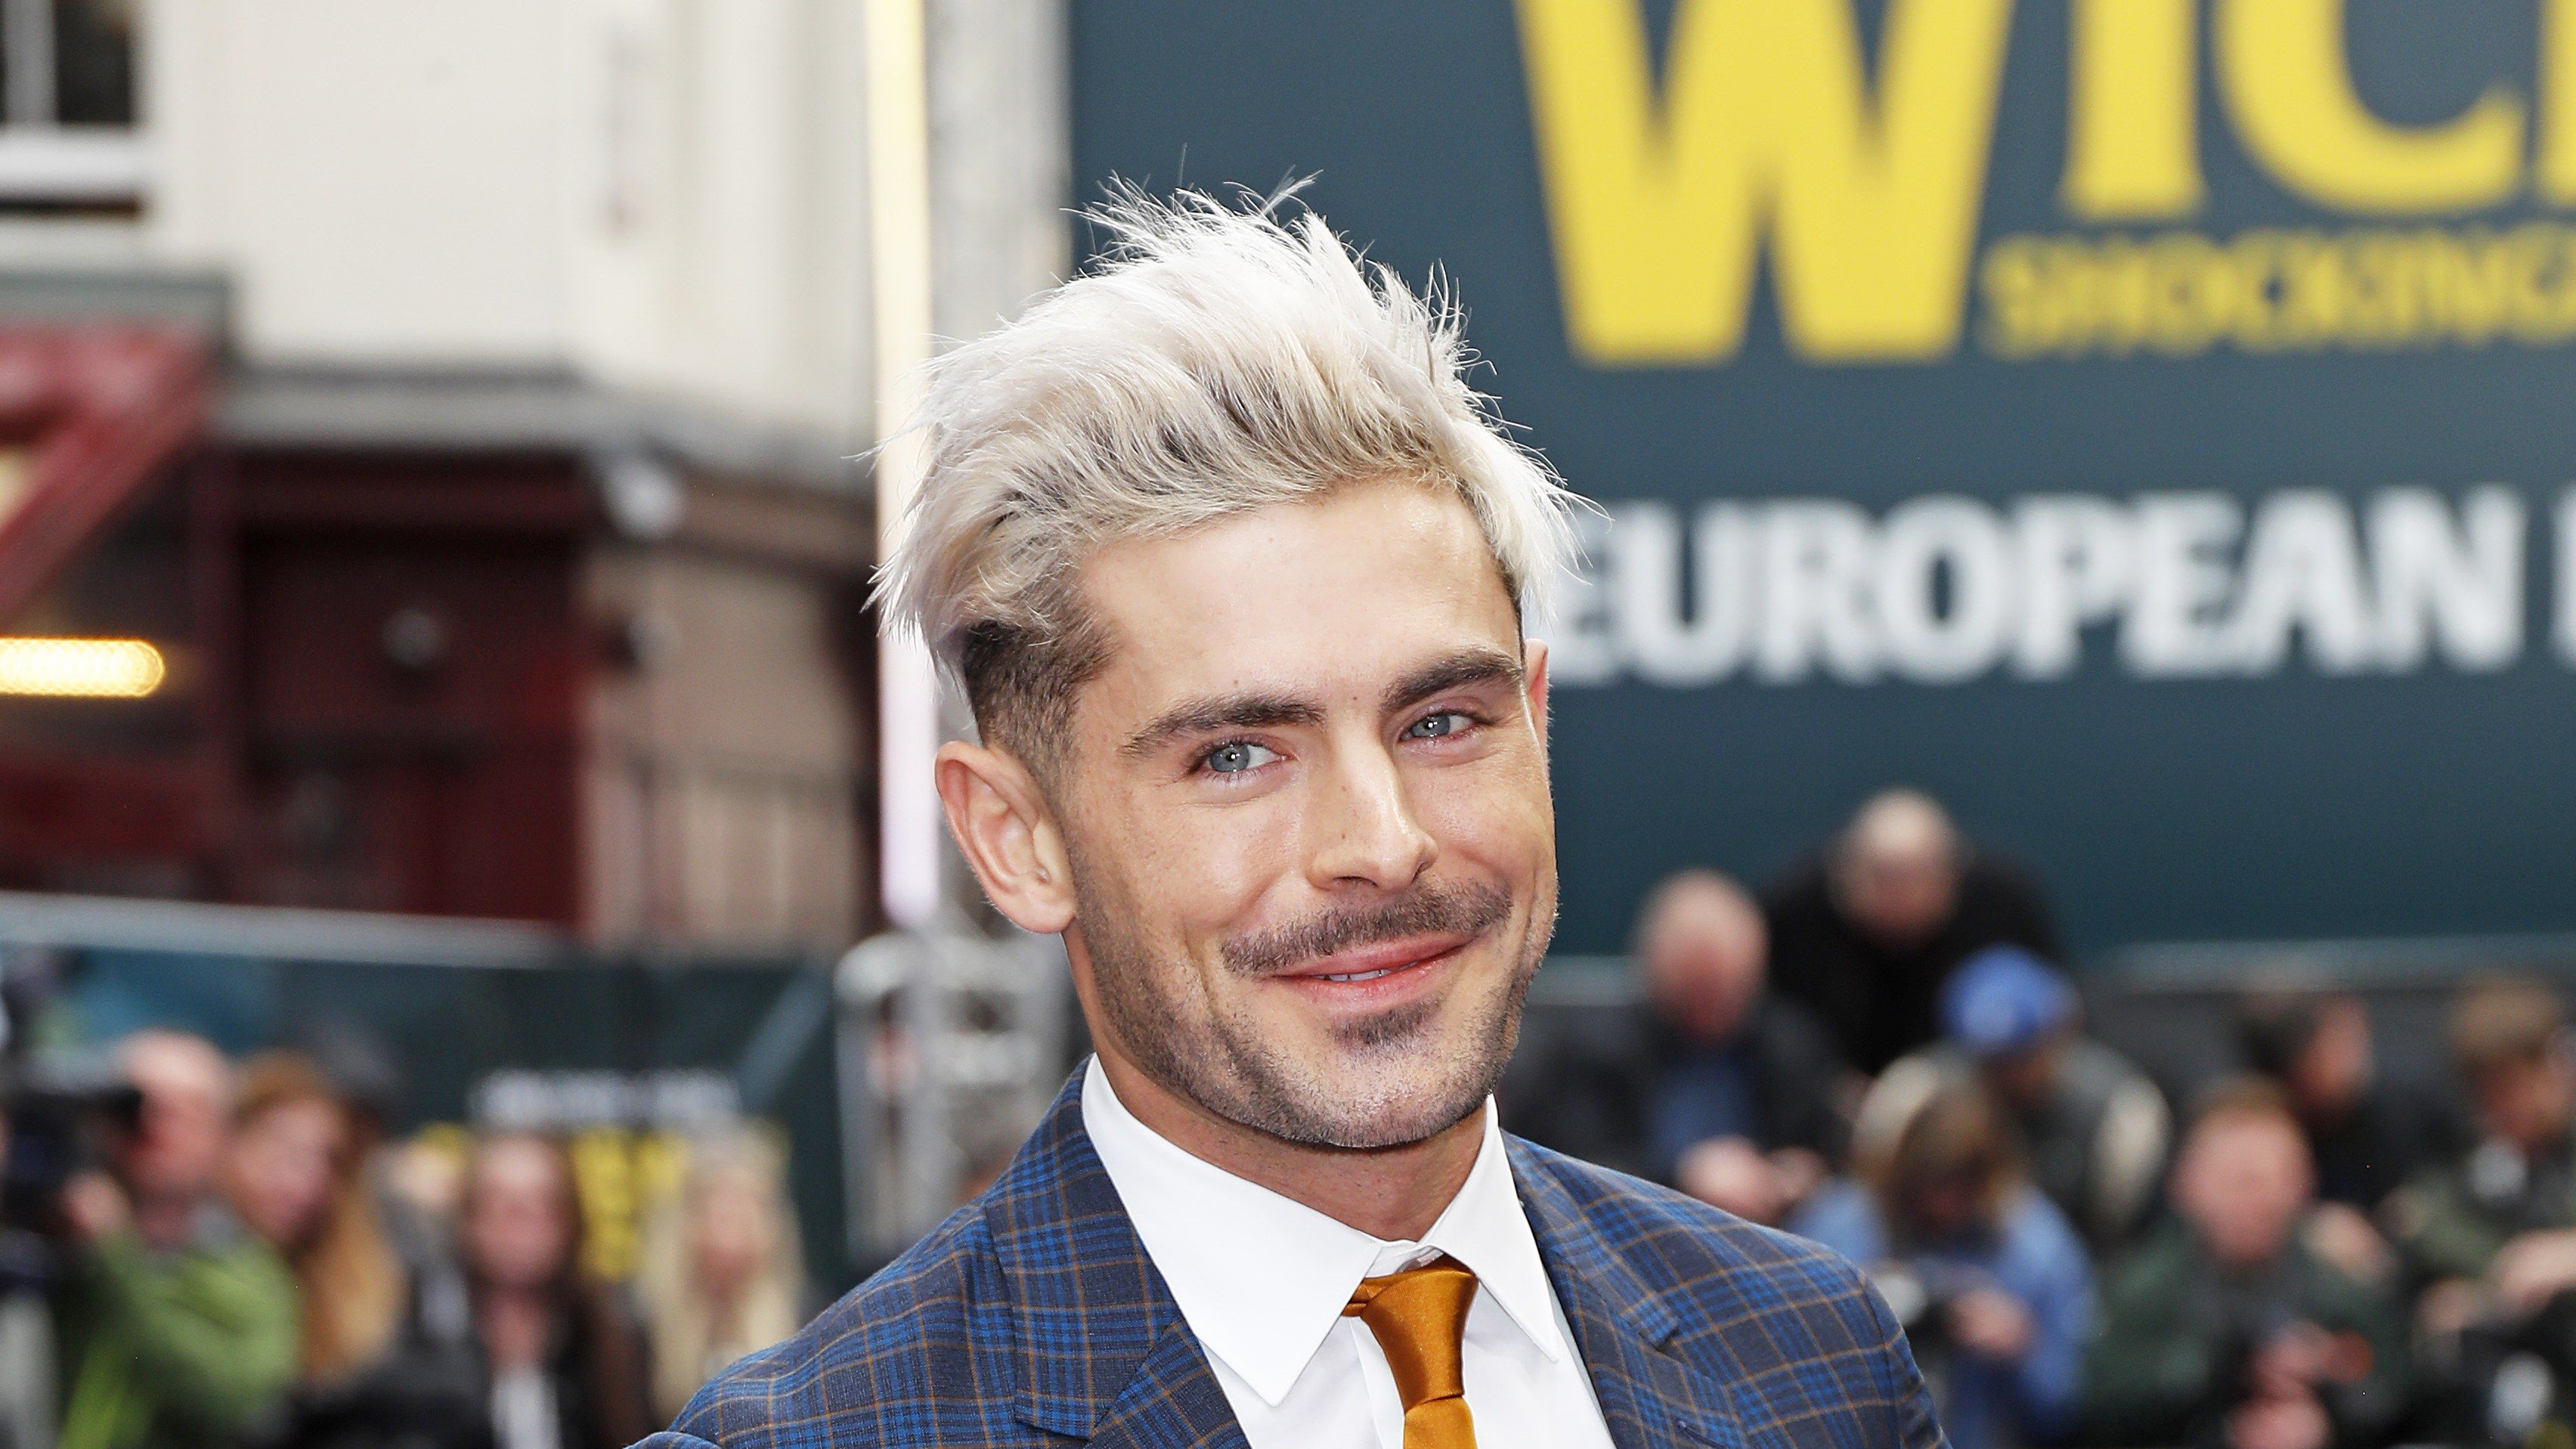 Zac Efron Reportedly Hospitalized With a Bacterial Infection